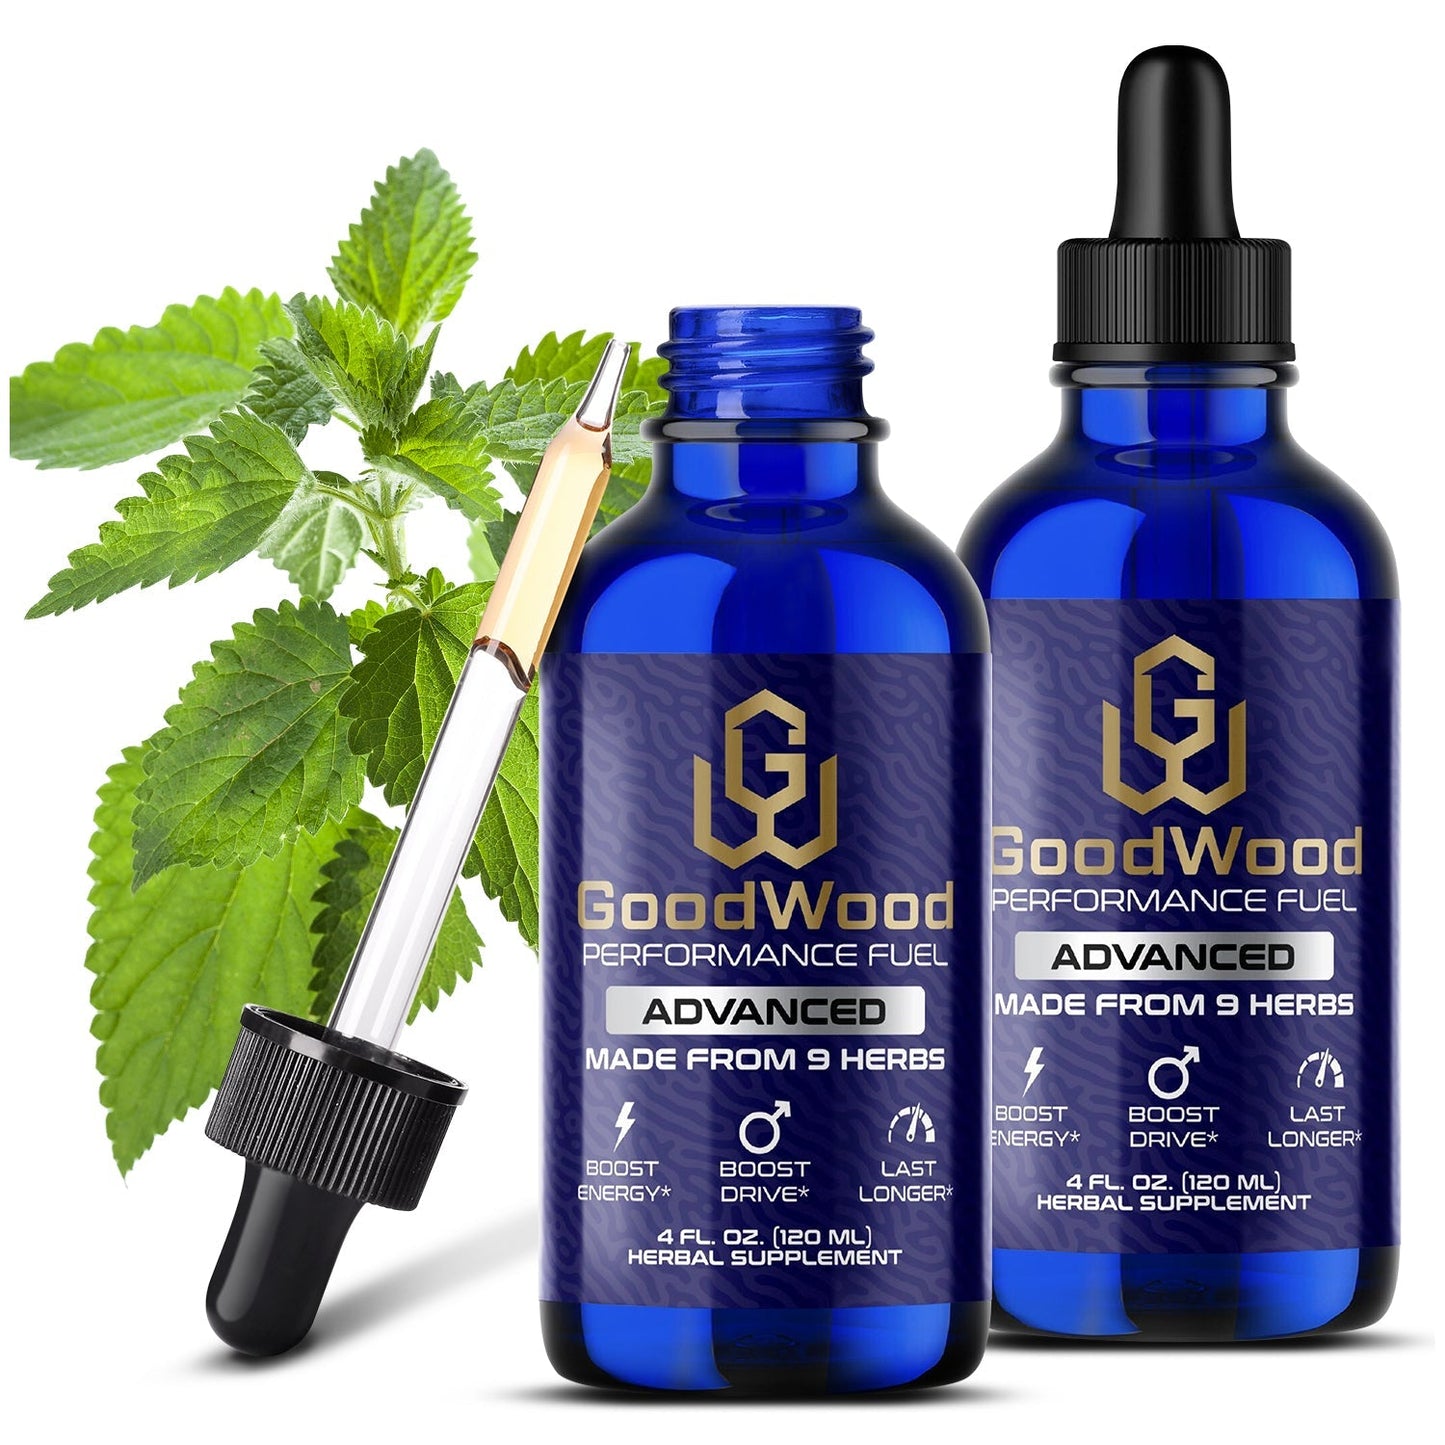 Free Trial Bottle of GoodWood Advanced